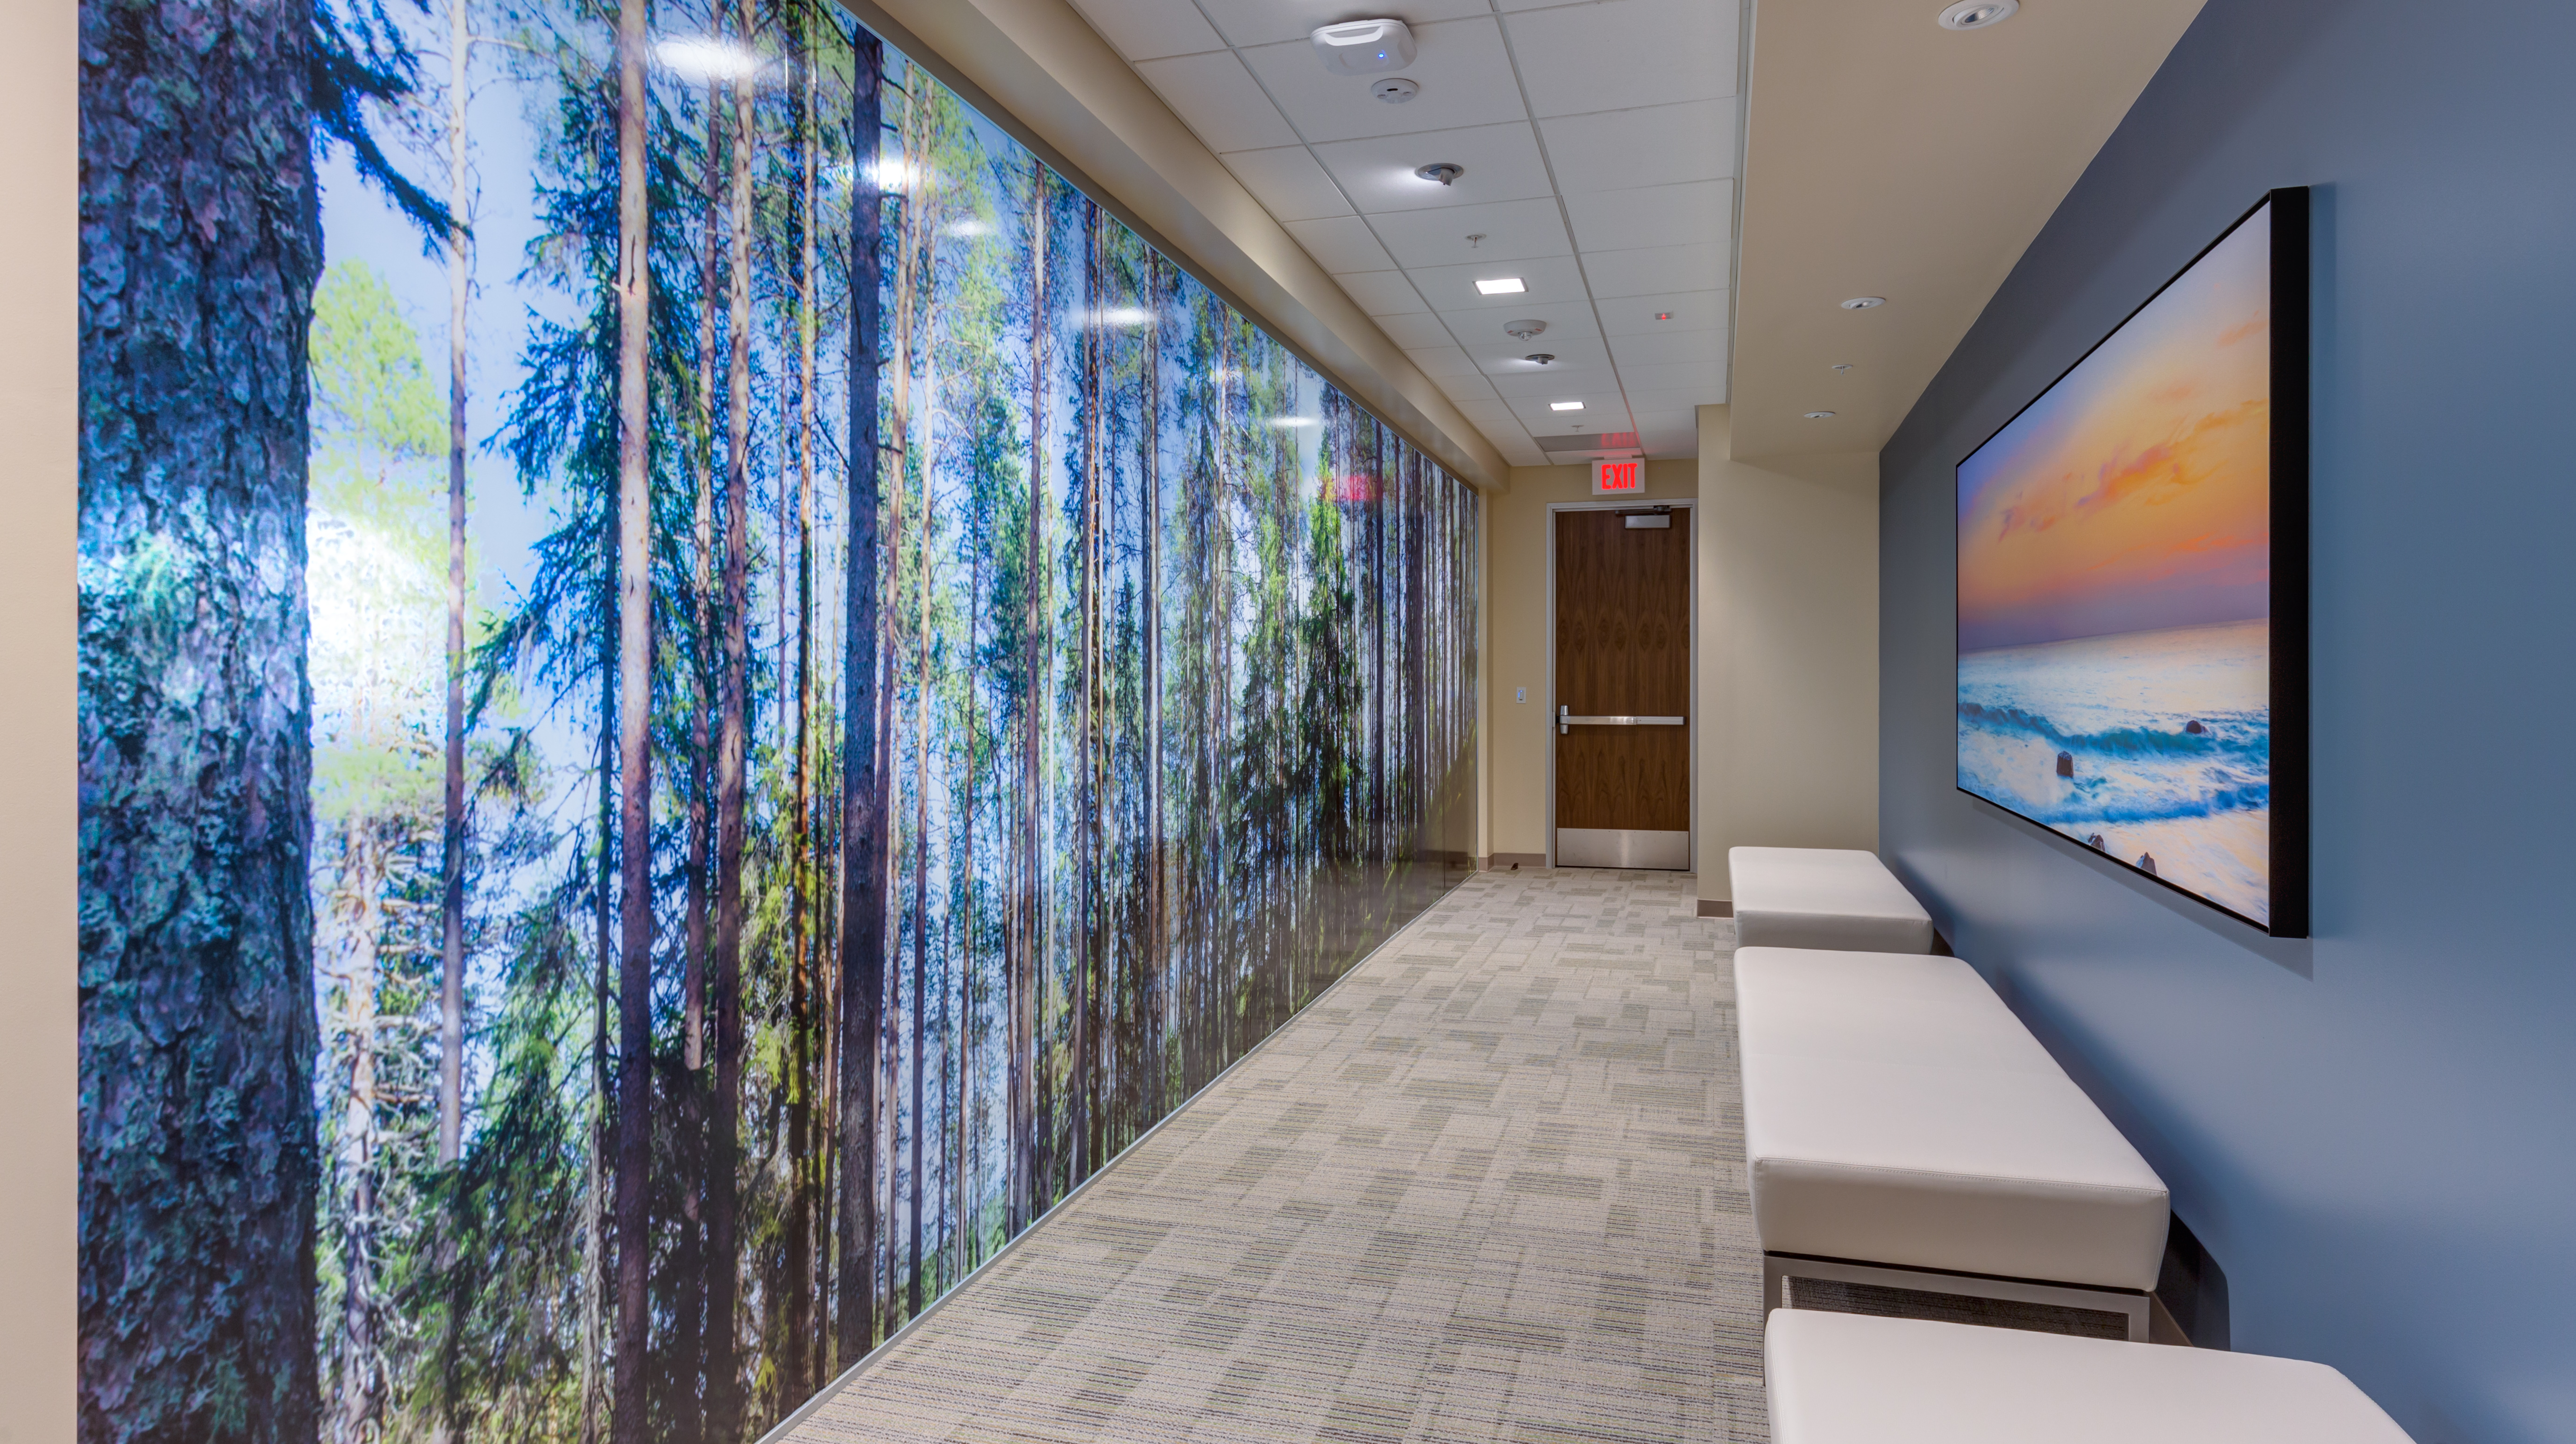 A view of a hallway lined with a tree mural and comfortable seats